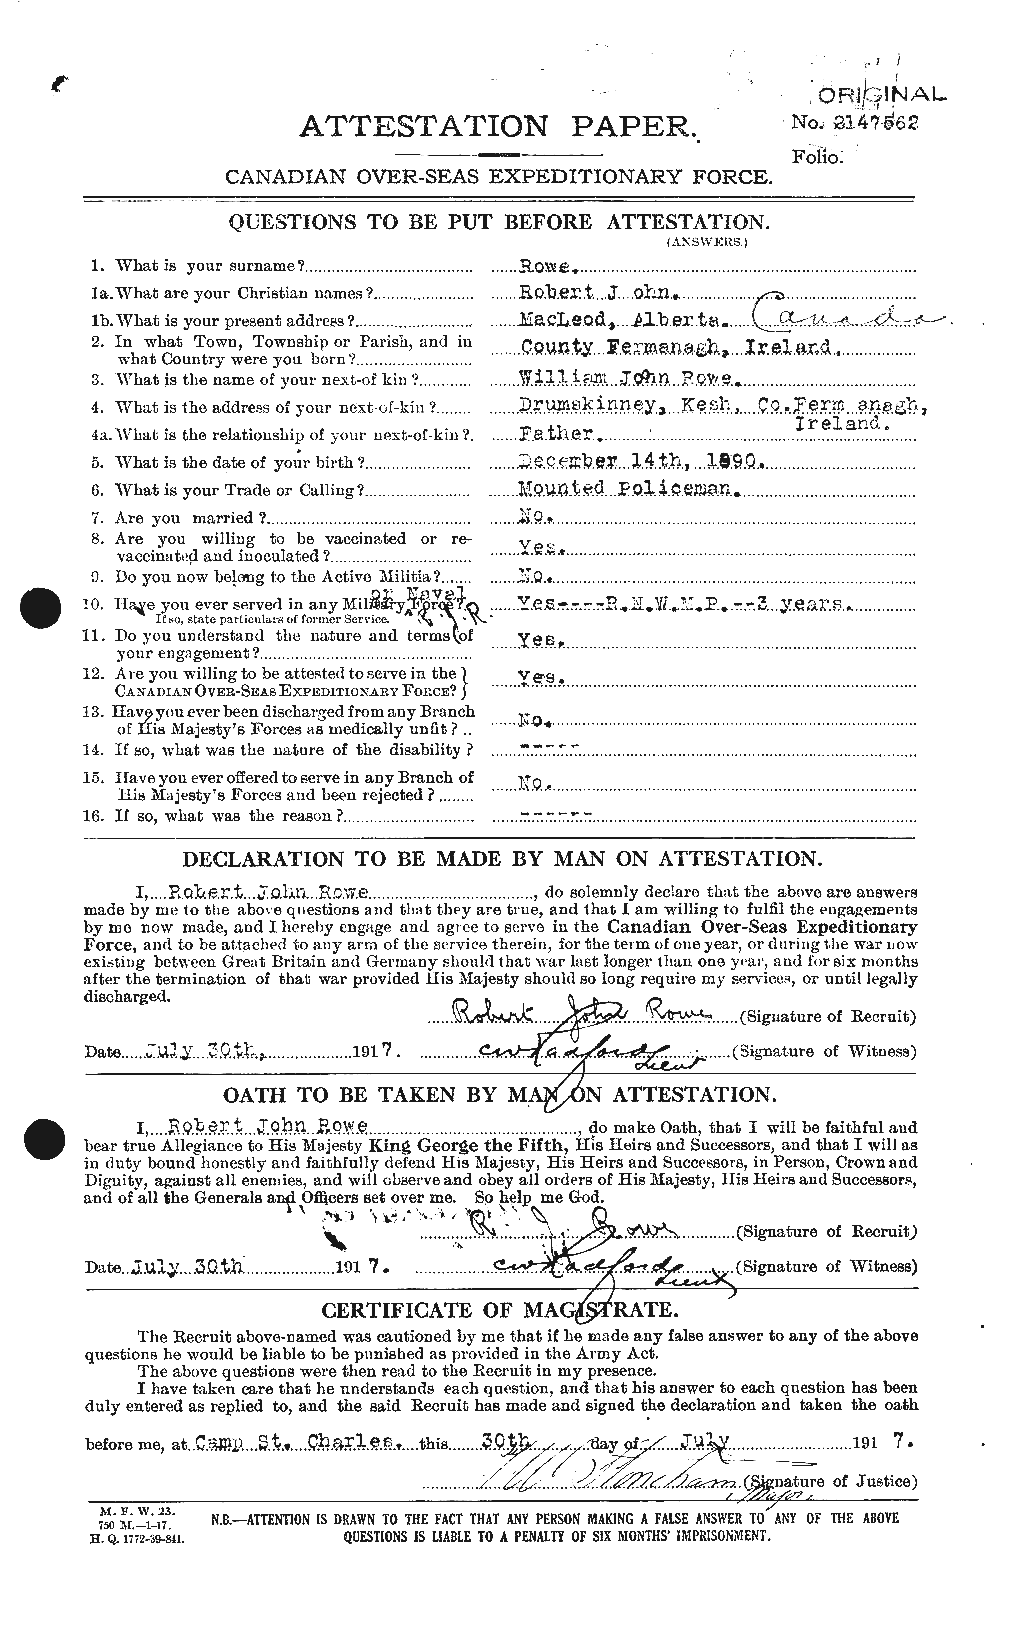 Personnel Records of the First World War - CEF 615974a